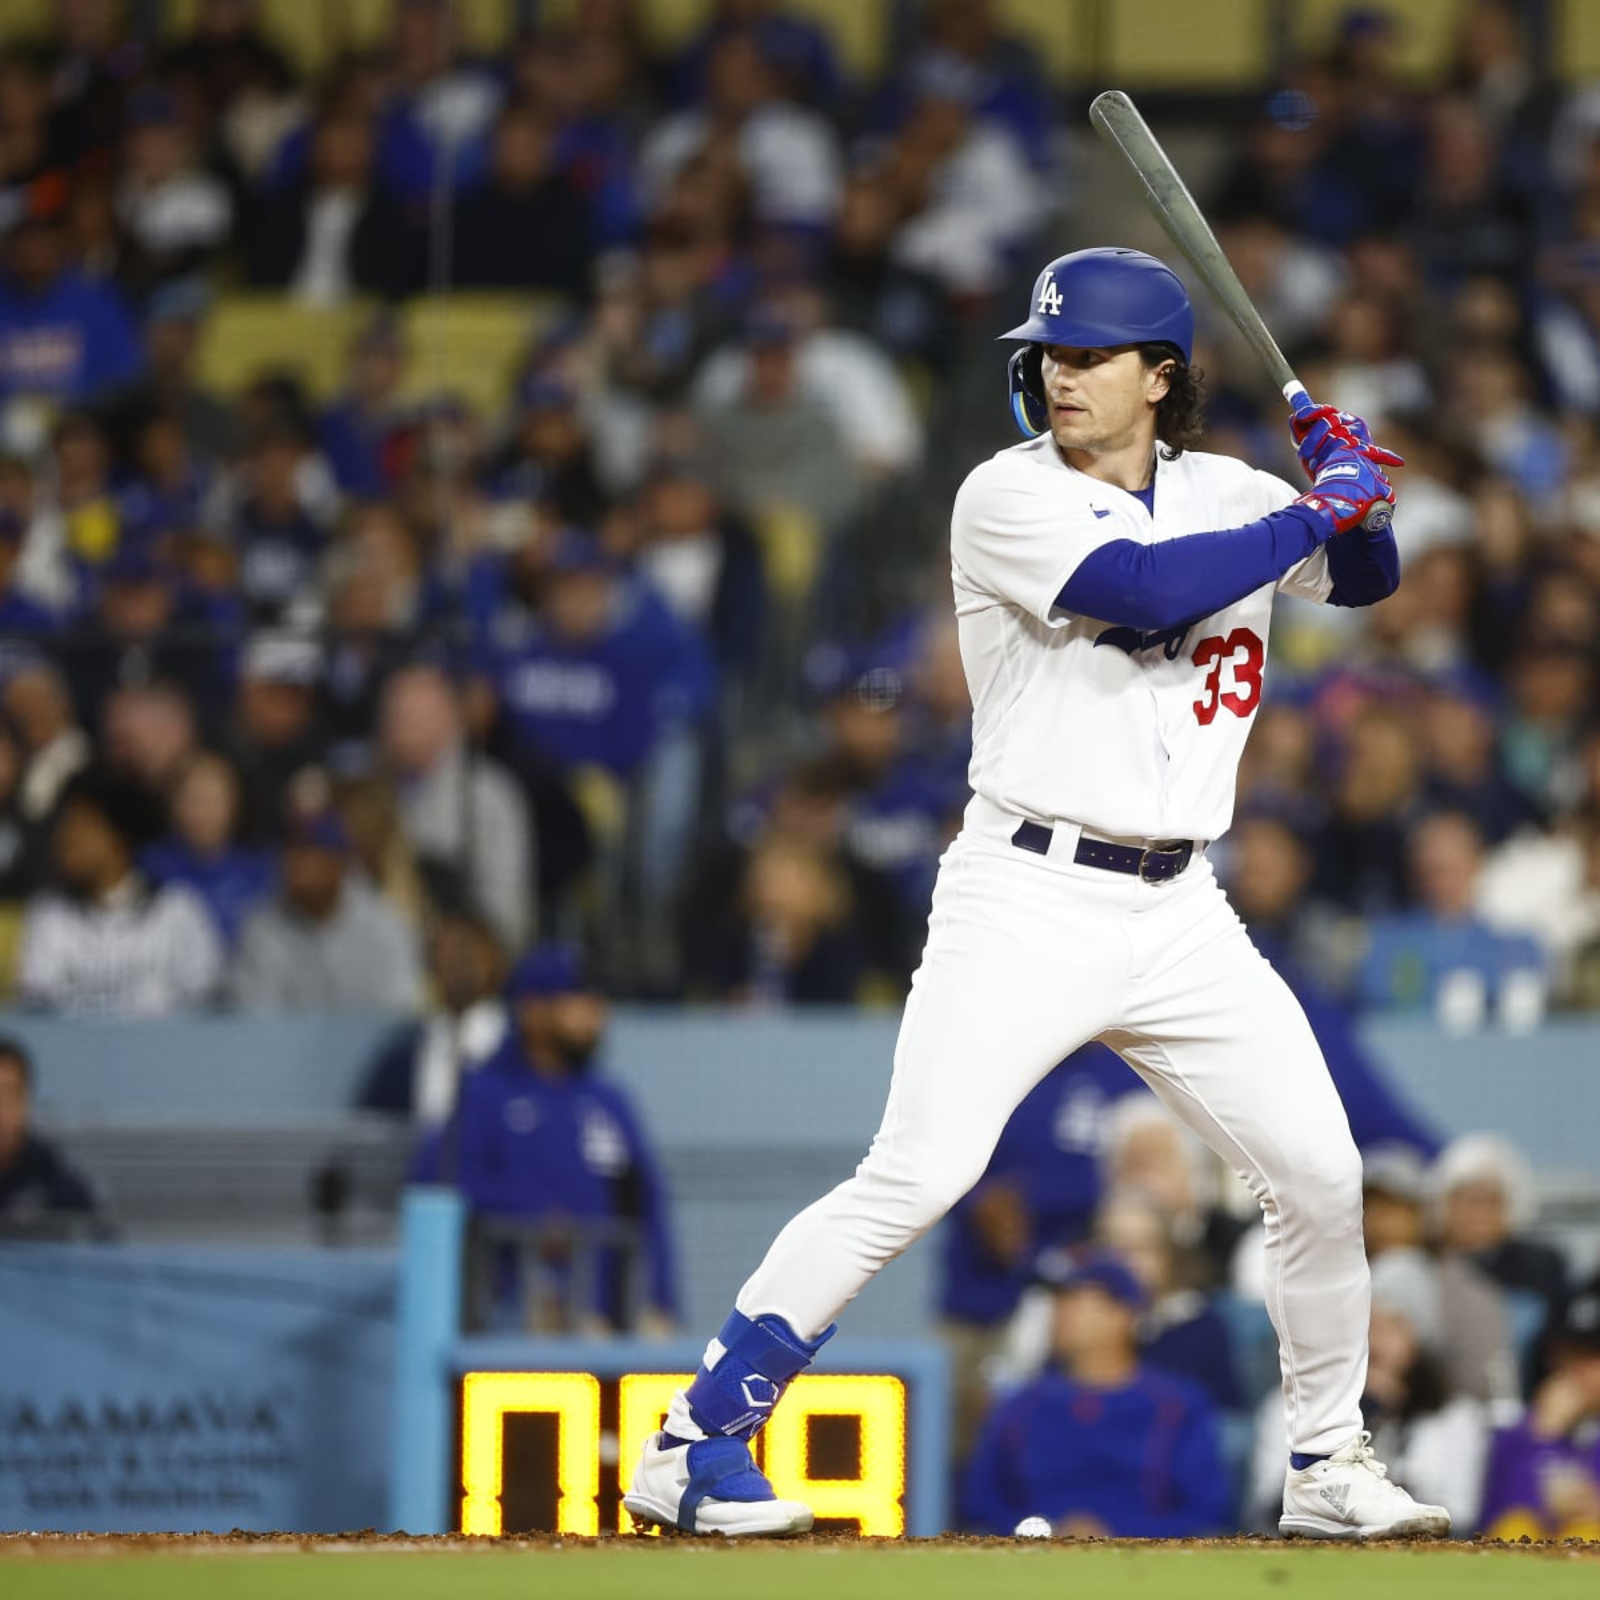 Is Dodgers rookie James Outman due for a regression after a hot